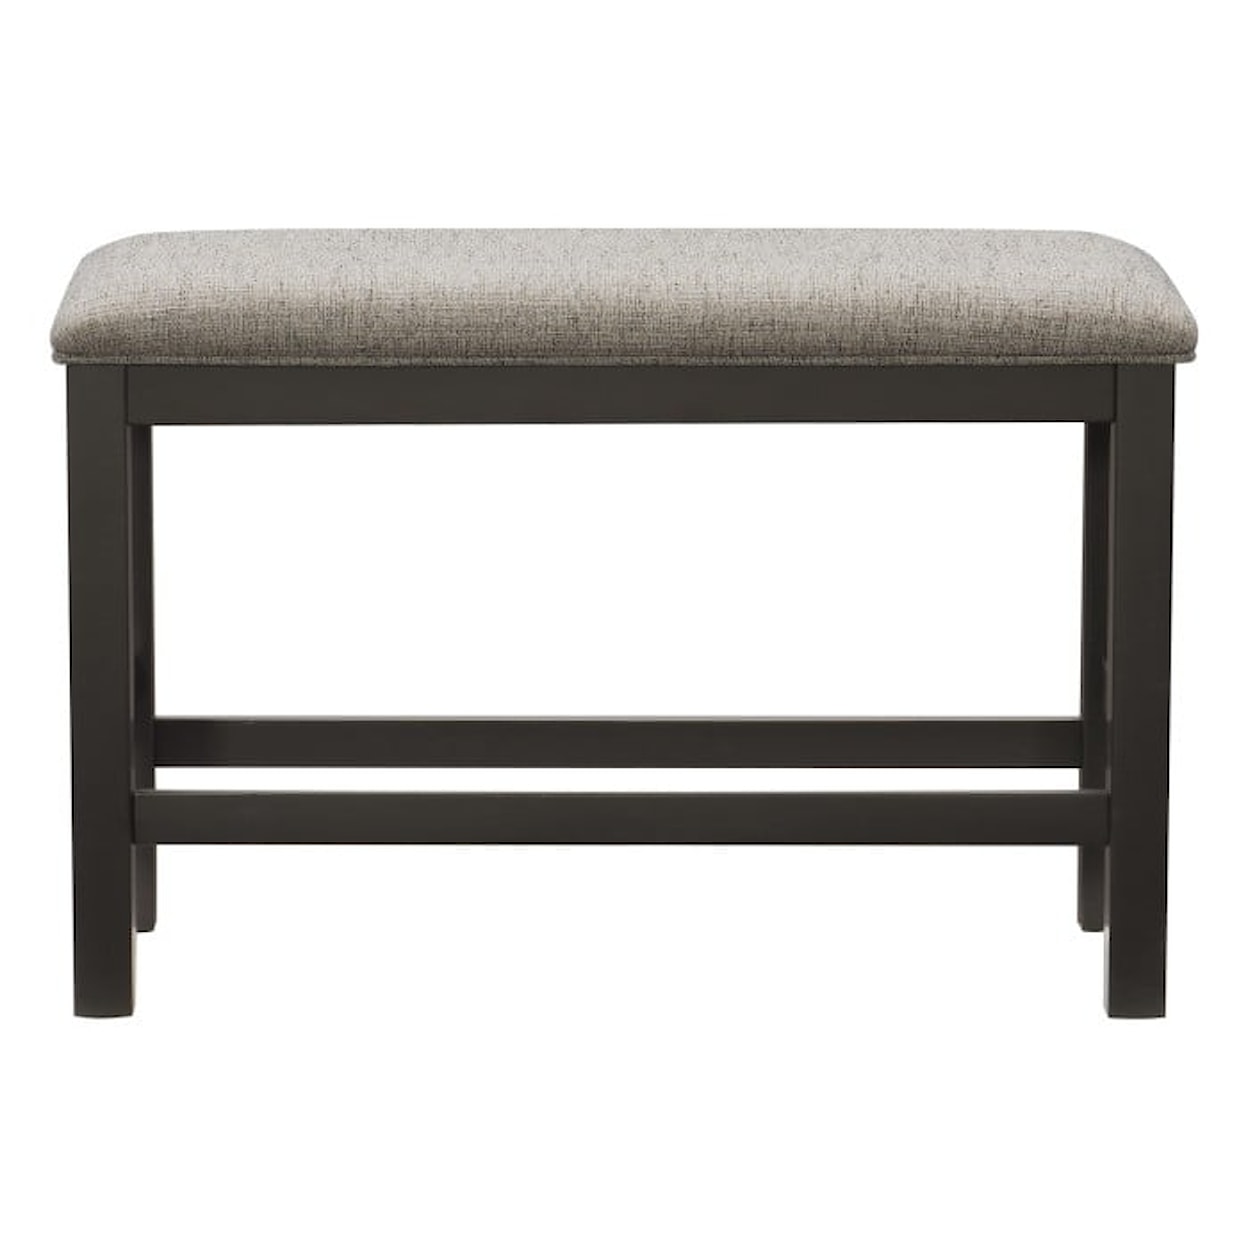 Homelegance Elias Counter Height Bench